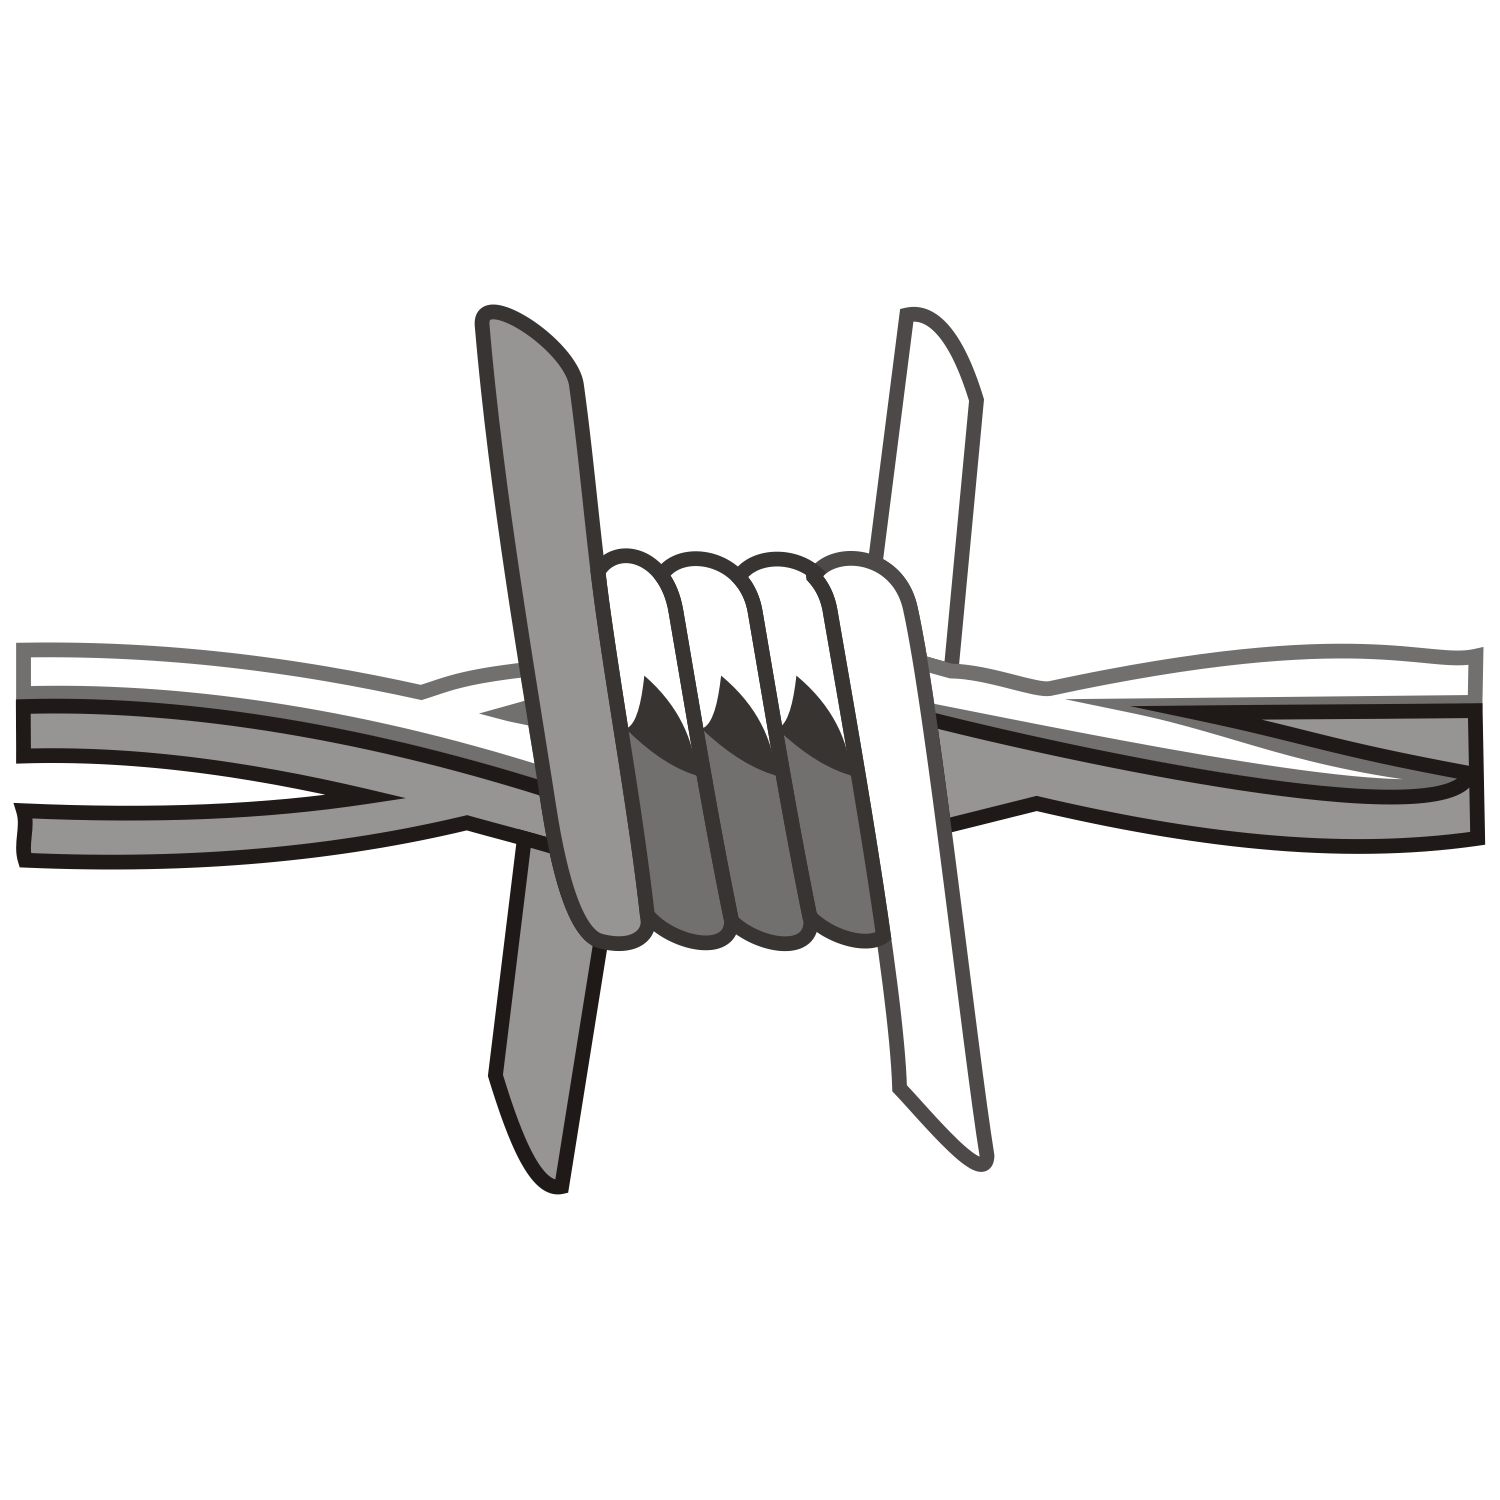 Barbed Wire Vector Free - ClipArt Best